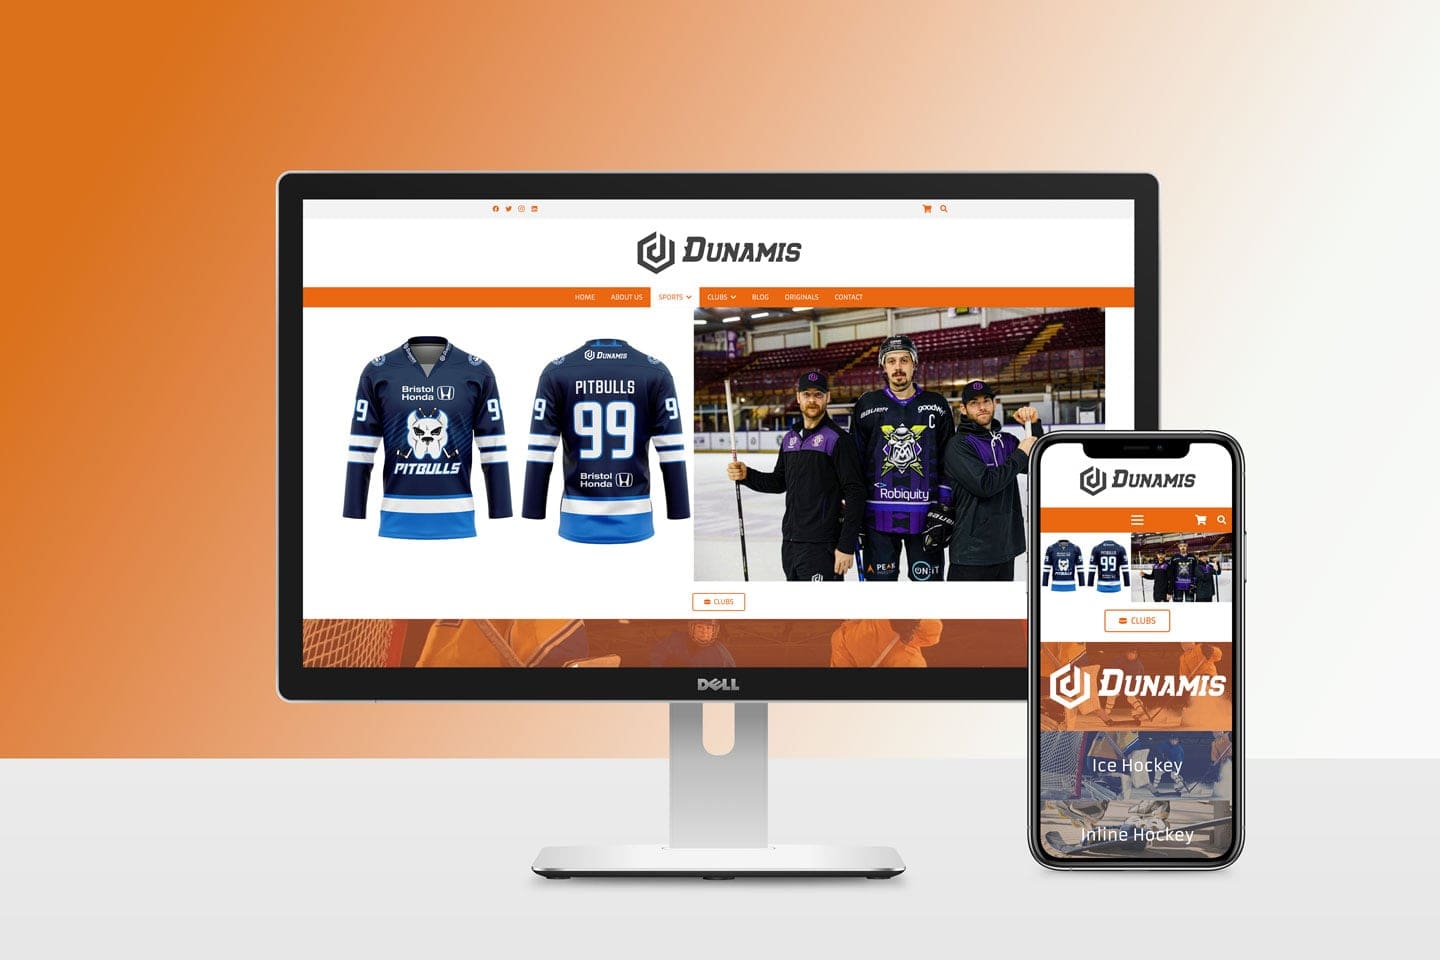 Desktop and Mobile View of the landing page for Dunamis Sports